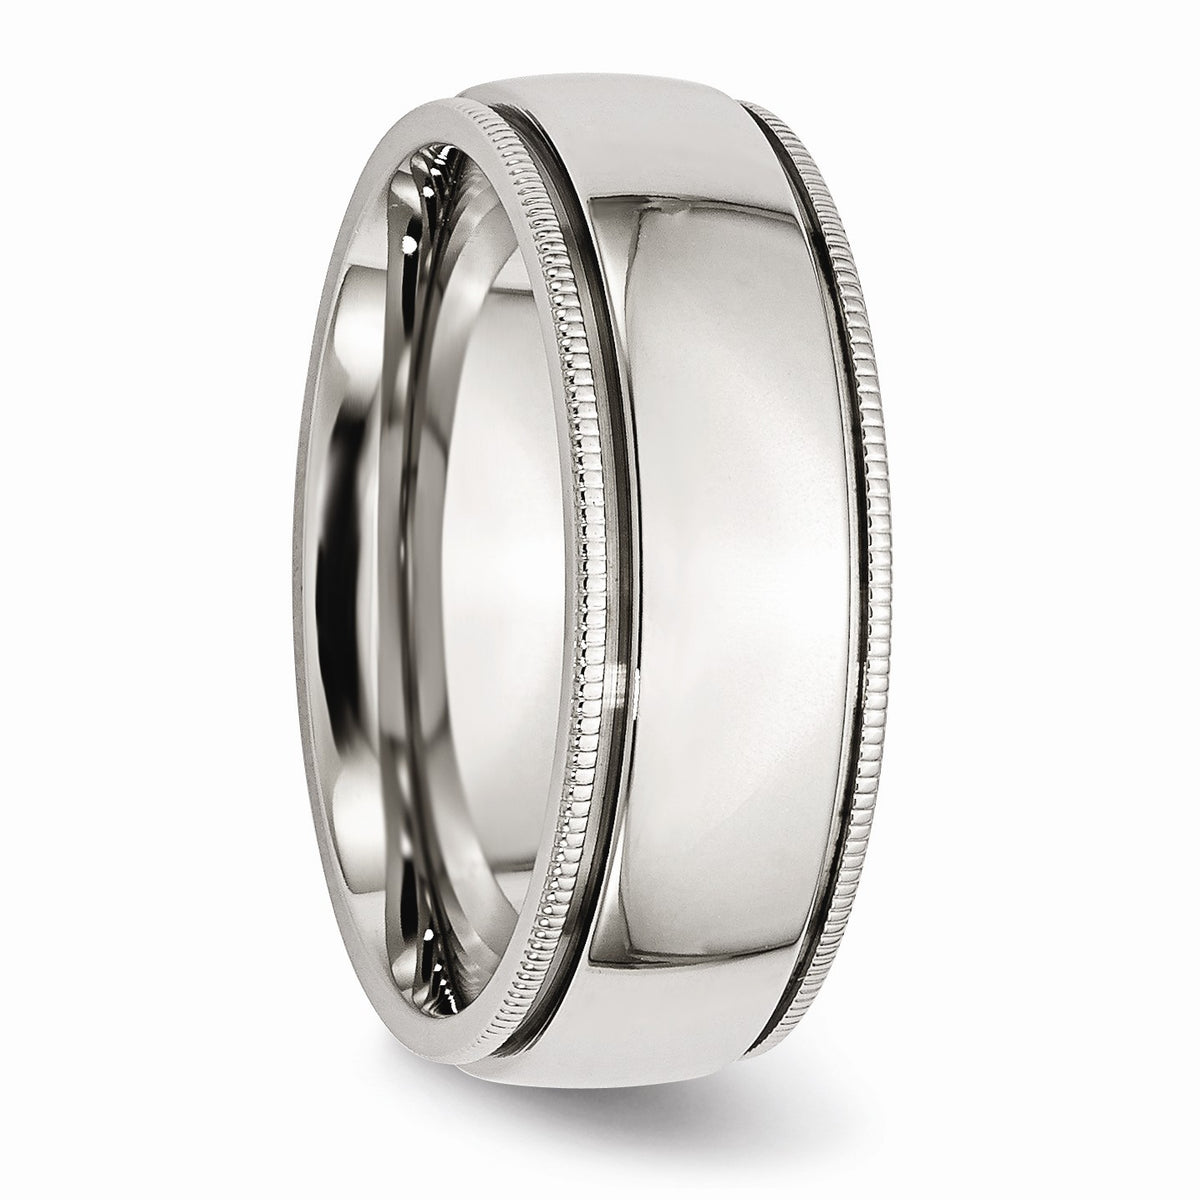 Alternate view of the Stainless Steel Beaded Edge 8mm Polished Comfort Fit Band by The Black Bow Jewelry Co.